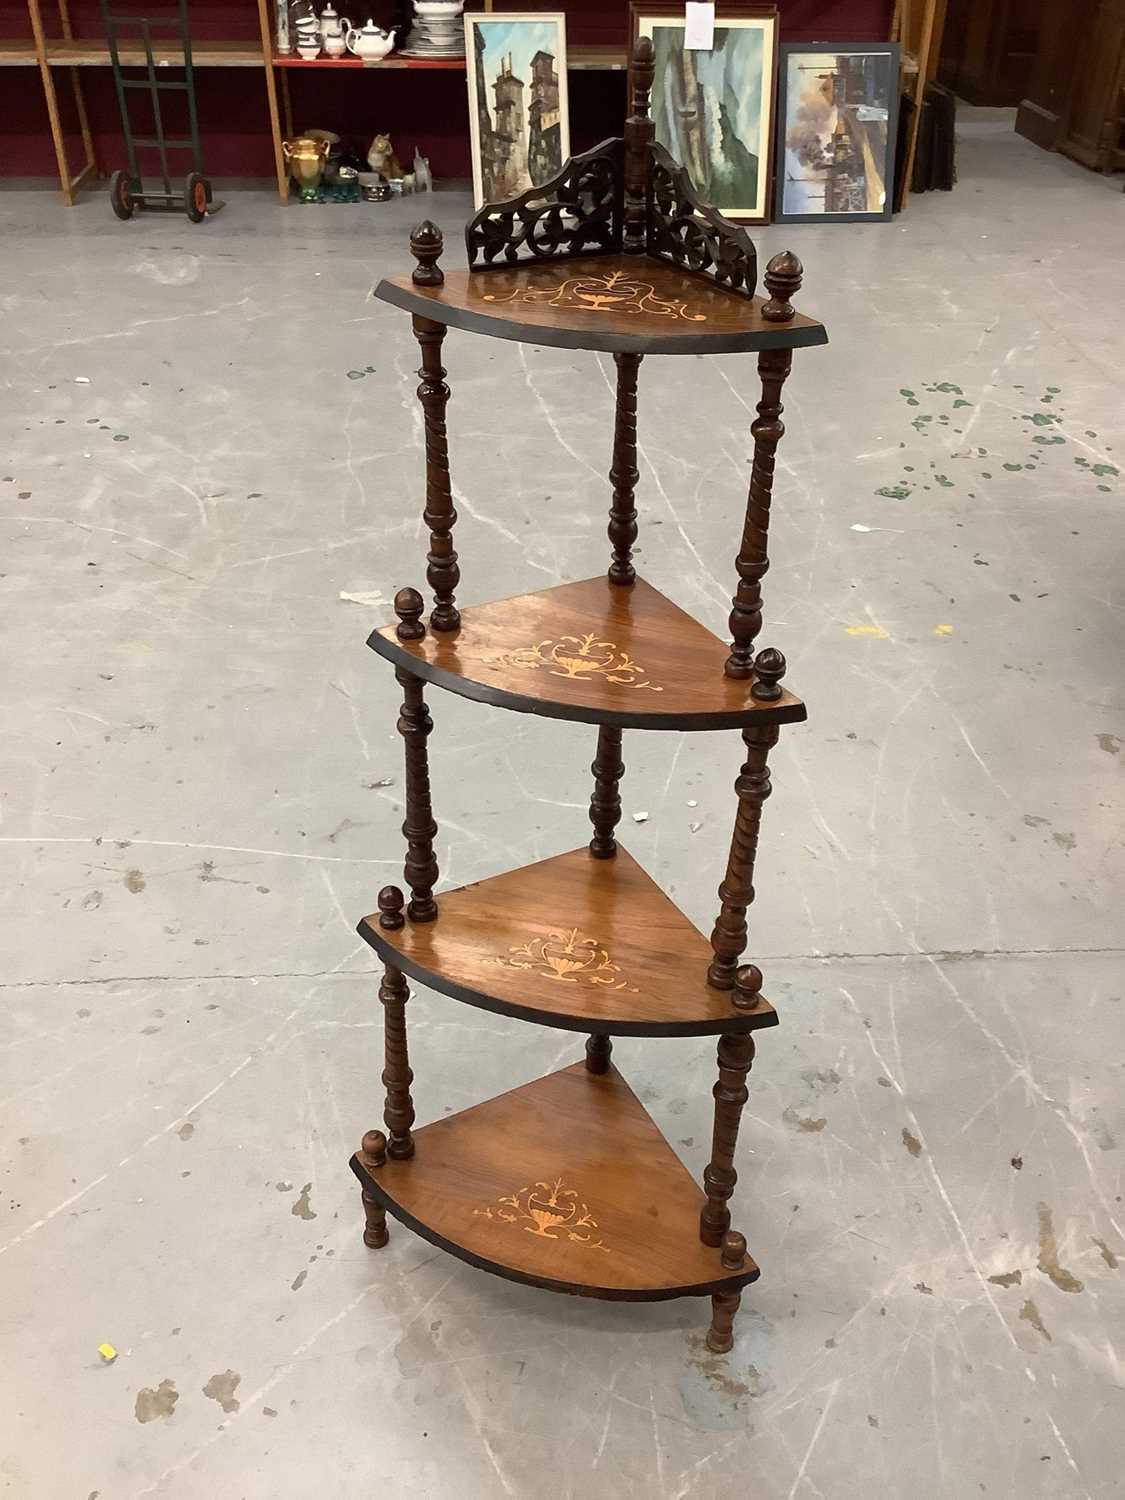 Lot 854 - Victorian inlaid figured walnut veneered four tier bow front whatnot with pierced fretwork and spiral fluted turned supports